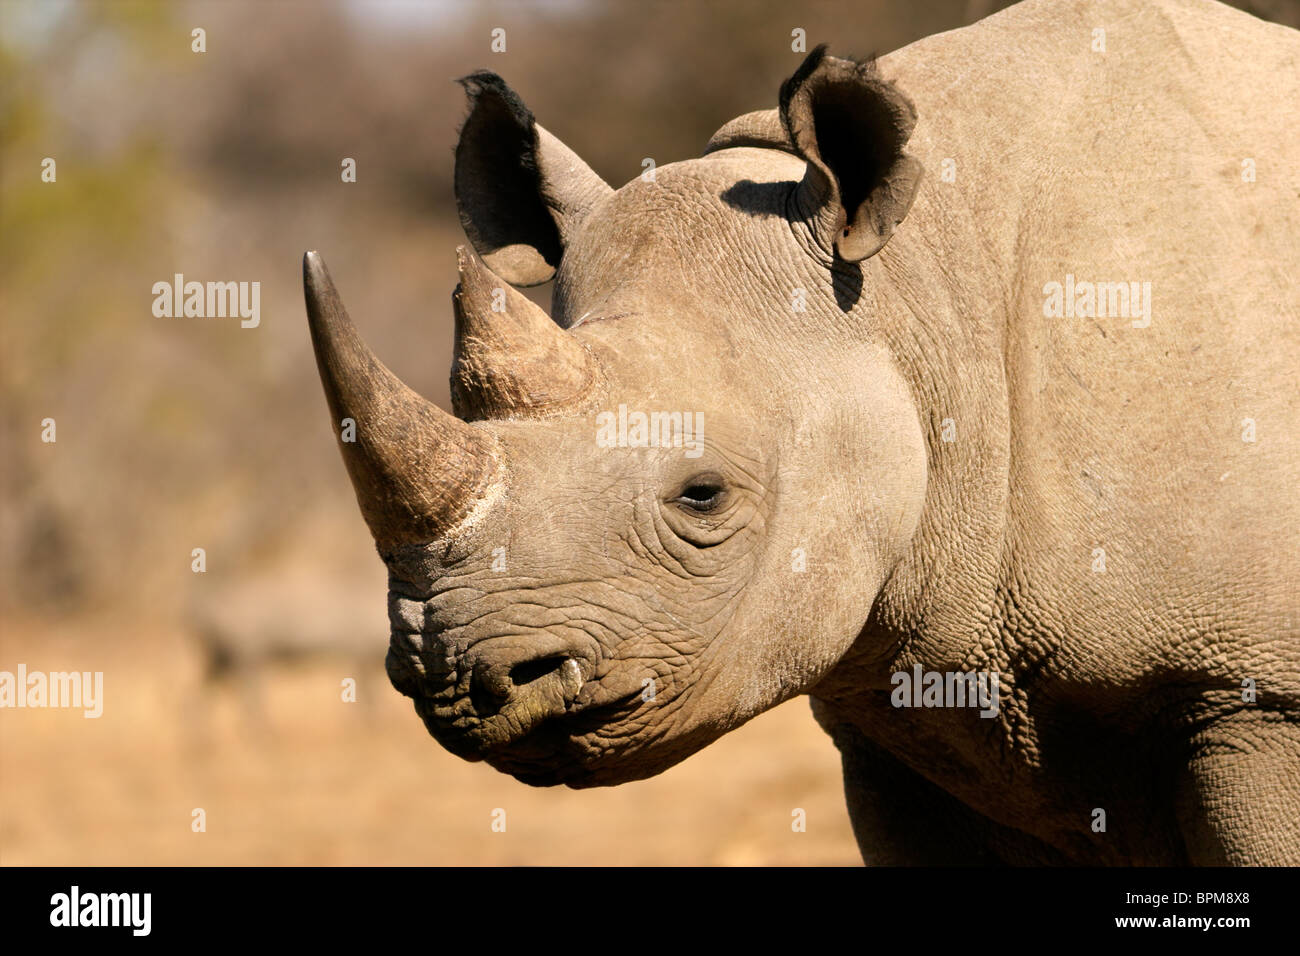 Portrait of a black (hooked-lipped) rhinoceros (Diceros bicornis), South Africa Stock Photo